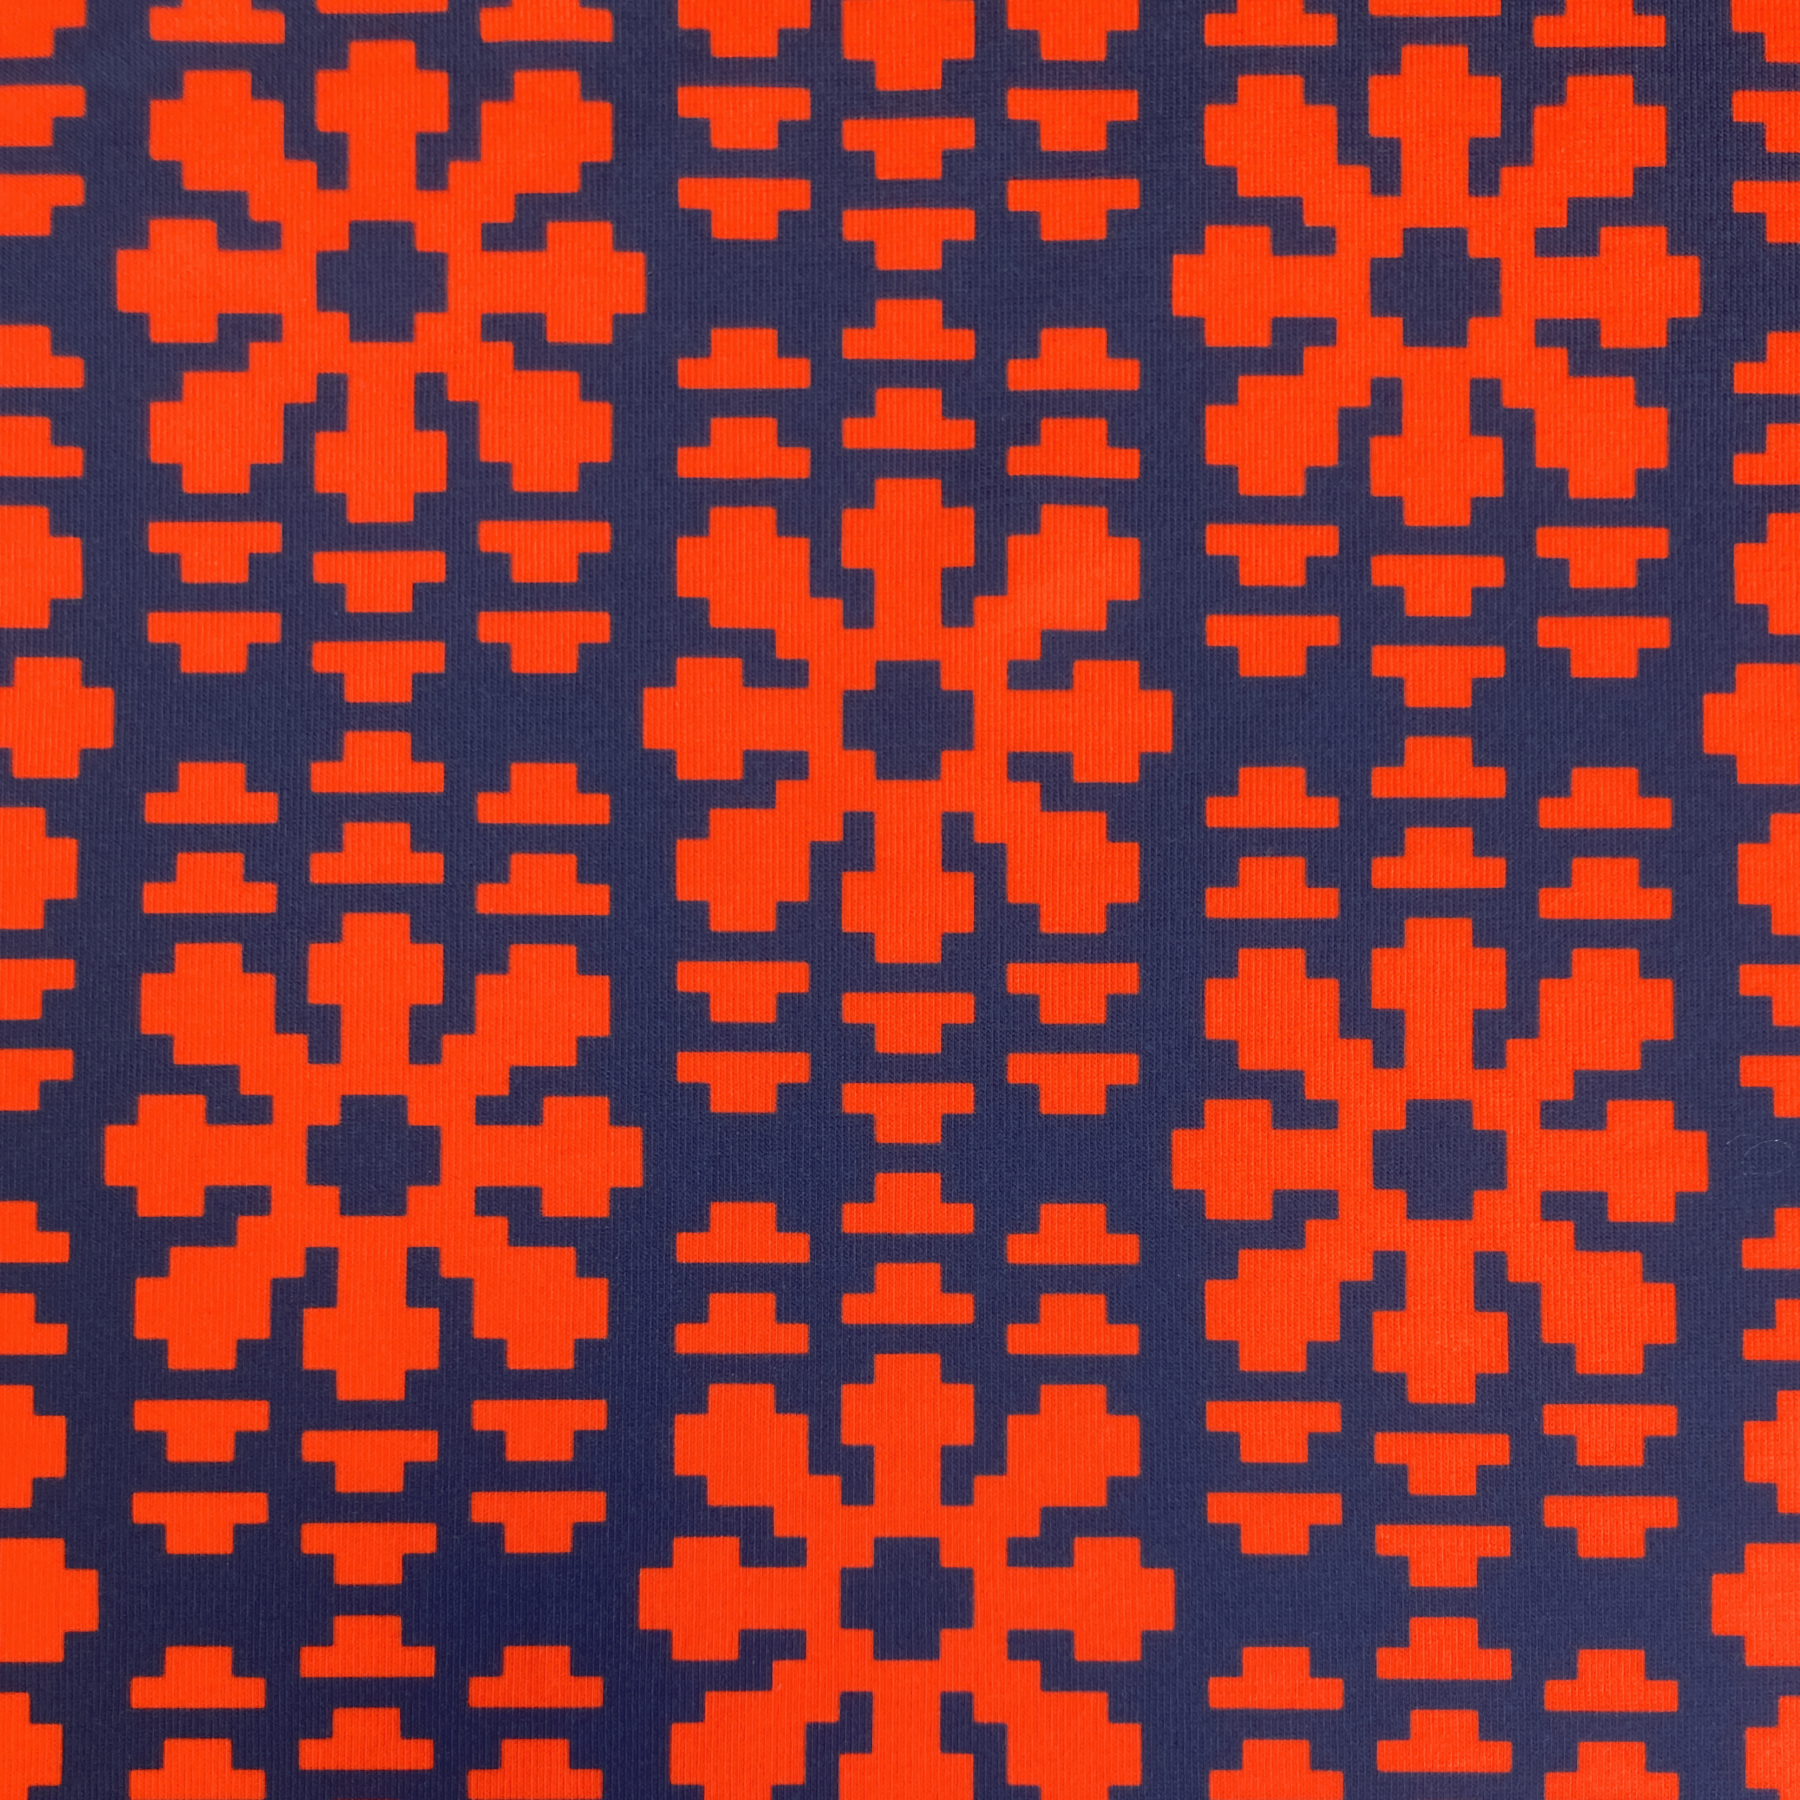 Broadcast Blooms echoing pixelated starburst repeat pattern in scarlet red on a dark navy blue background.